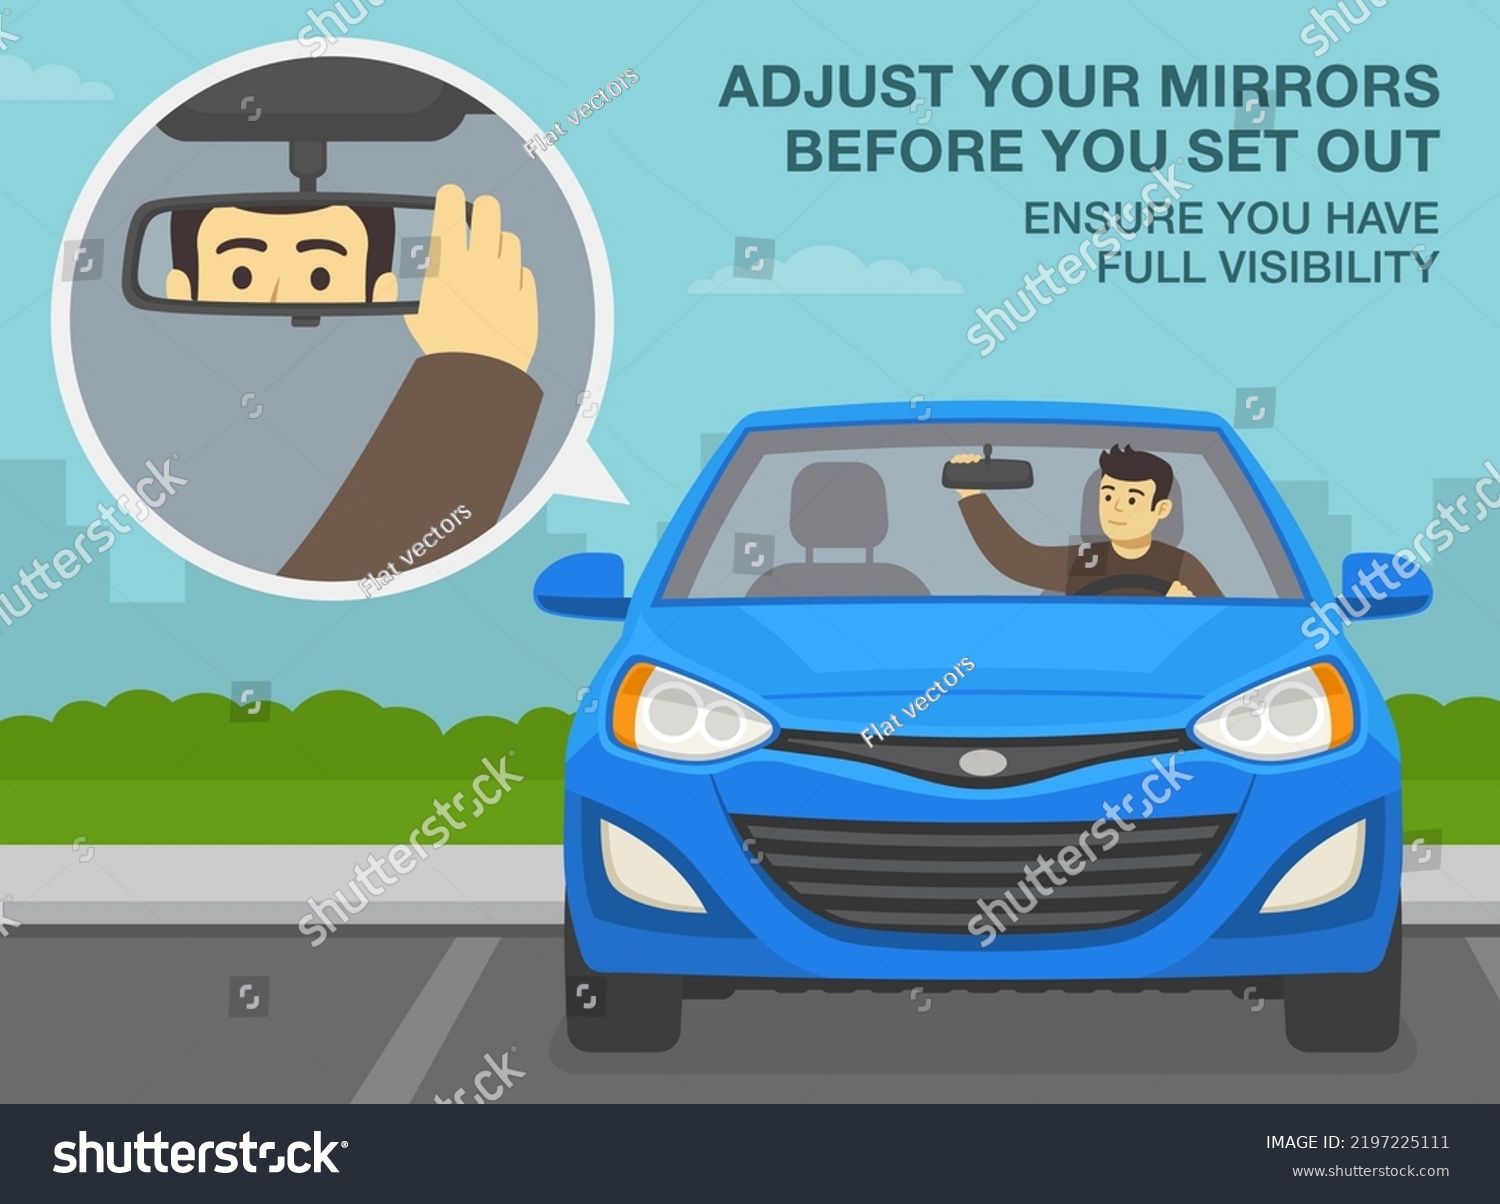 SVG of Safe driving tips and traffic regulation rules. Adjust your mirrors before you set out, ensure you have full visibility. Parked blue sedan car on city parking. Flat vector illustration template. svg